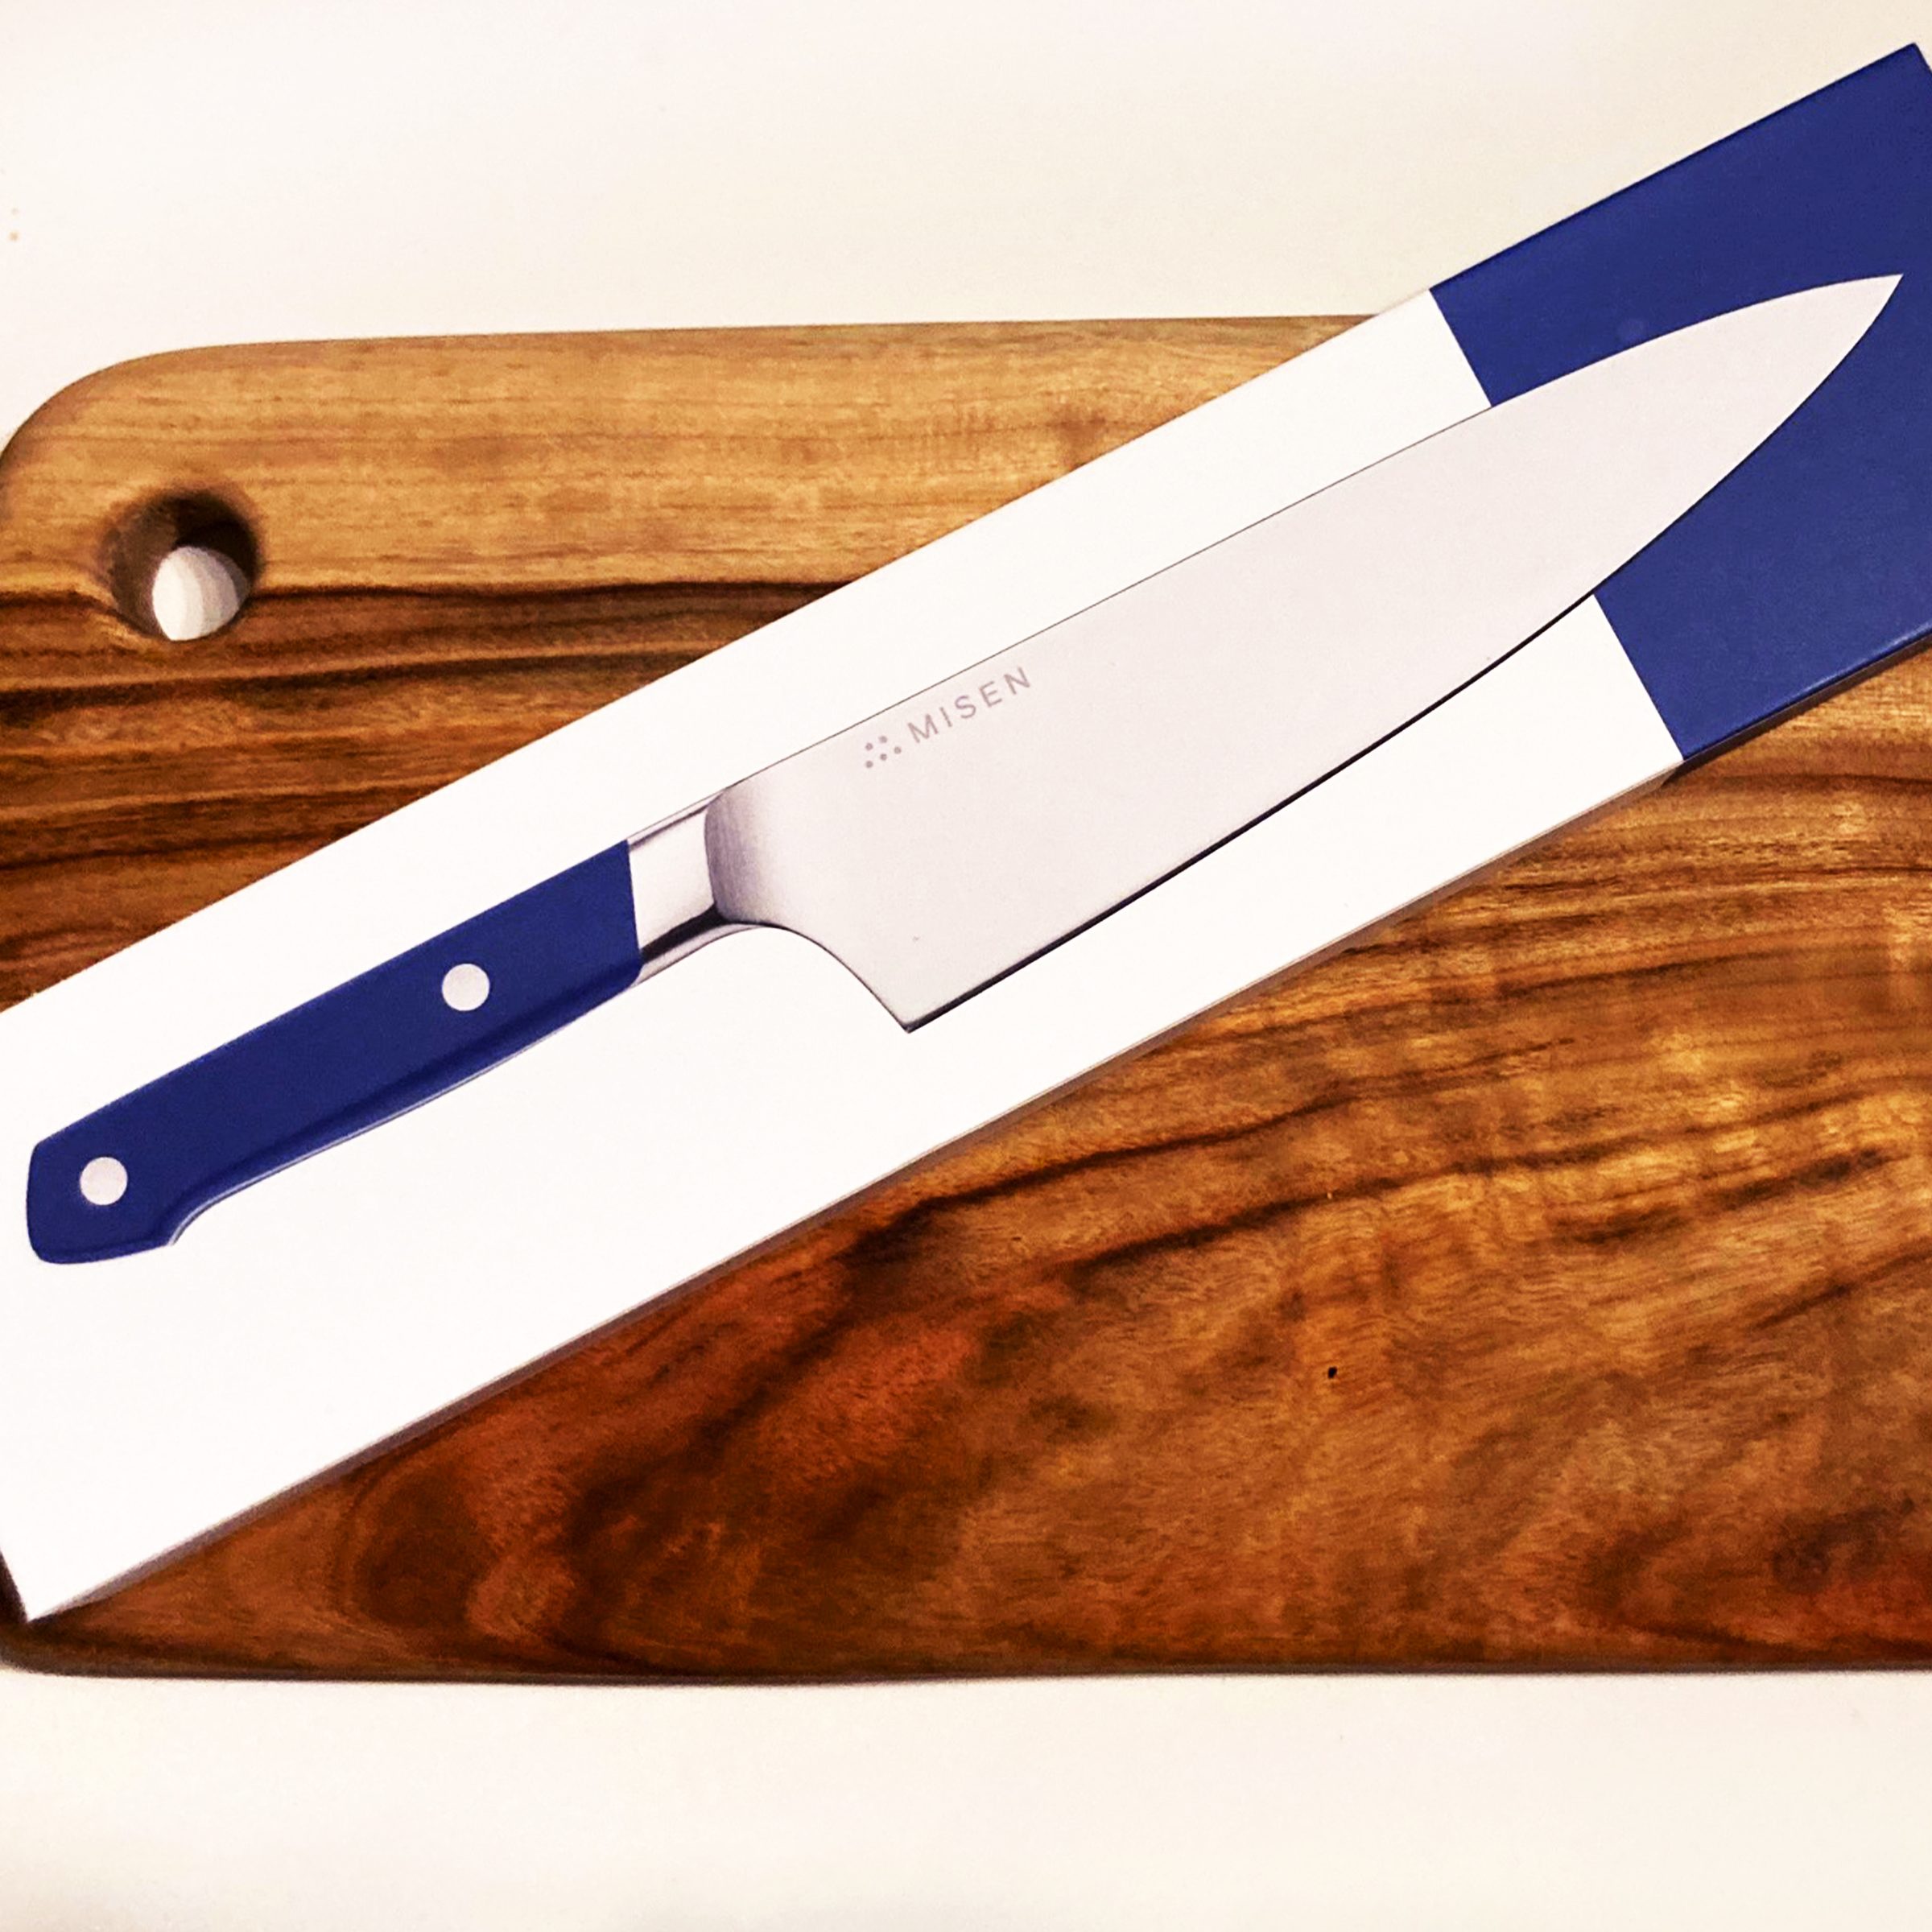 https://www.tasteofhome.com/wp-content/uploads/2021/11/Is-a-75-Misen-Knife-Worth-the-Investment_-Opener.jpg?fit=700%2C1024